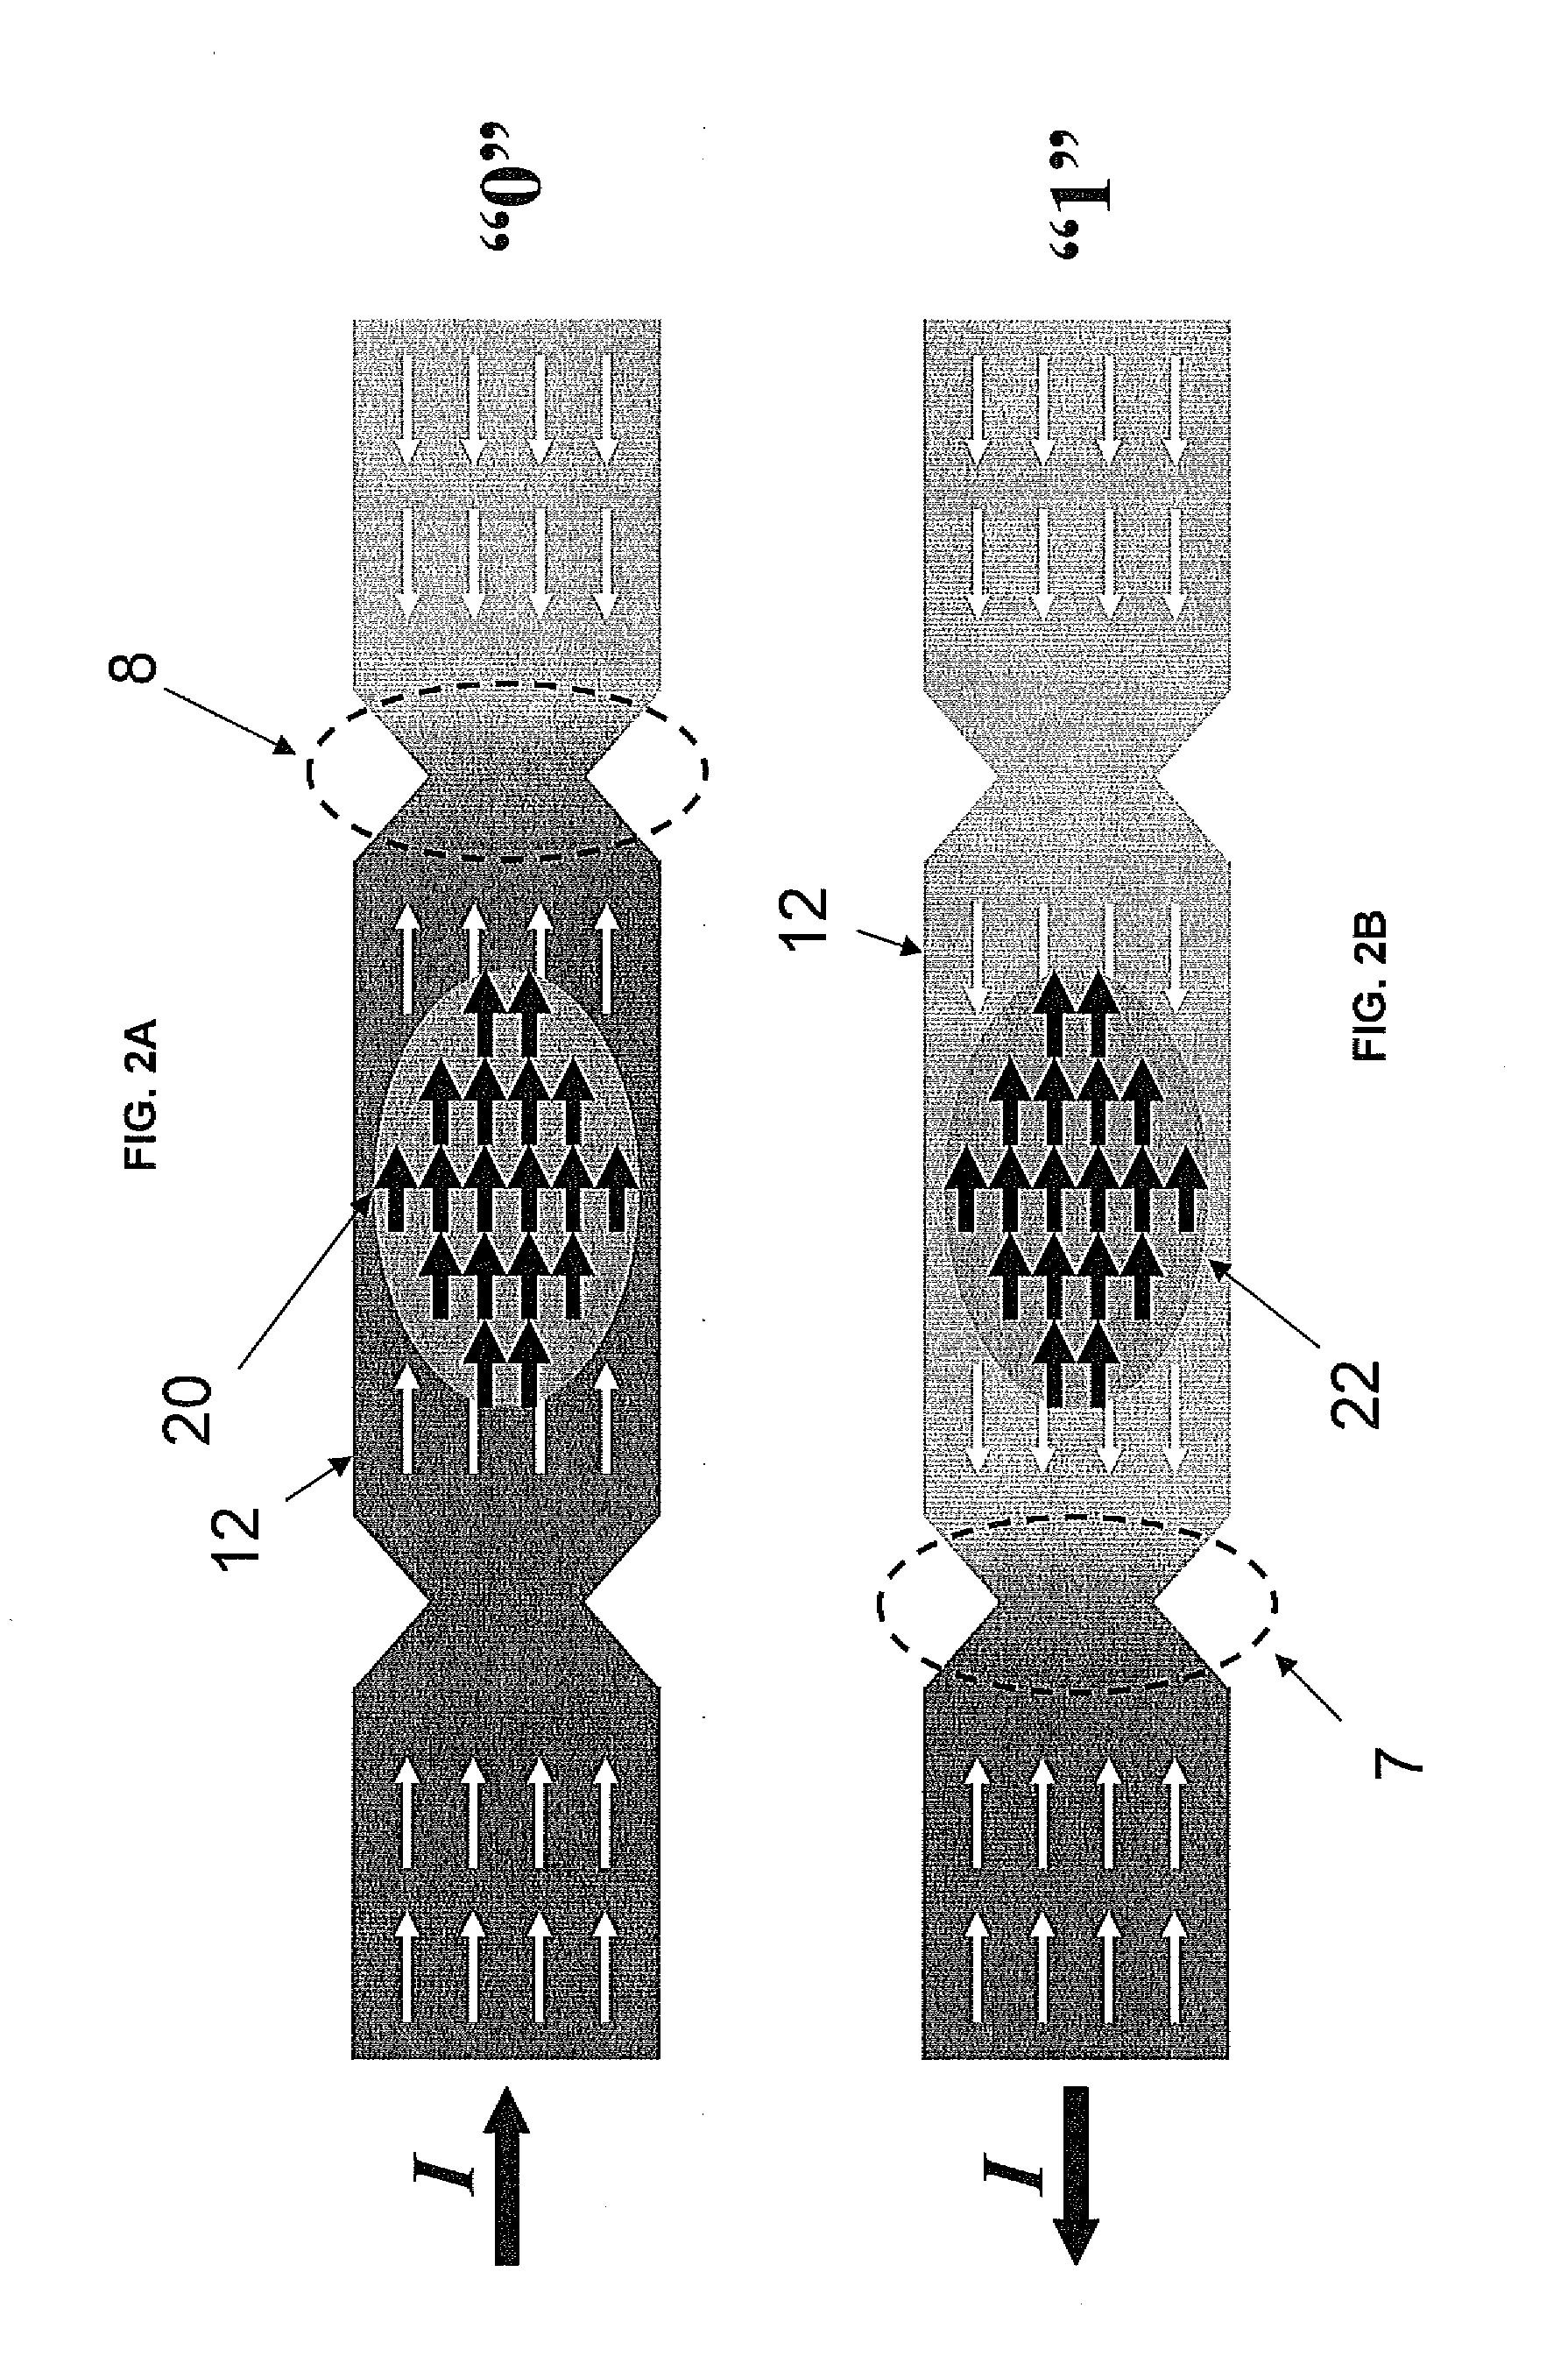 Switching mechanism of magnetic storage cell and logic unit using current induced domain wall motions